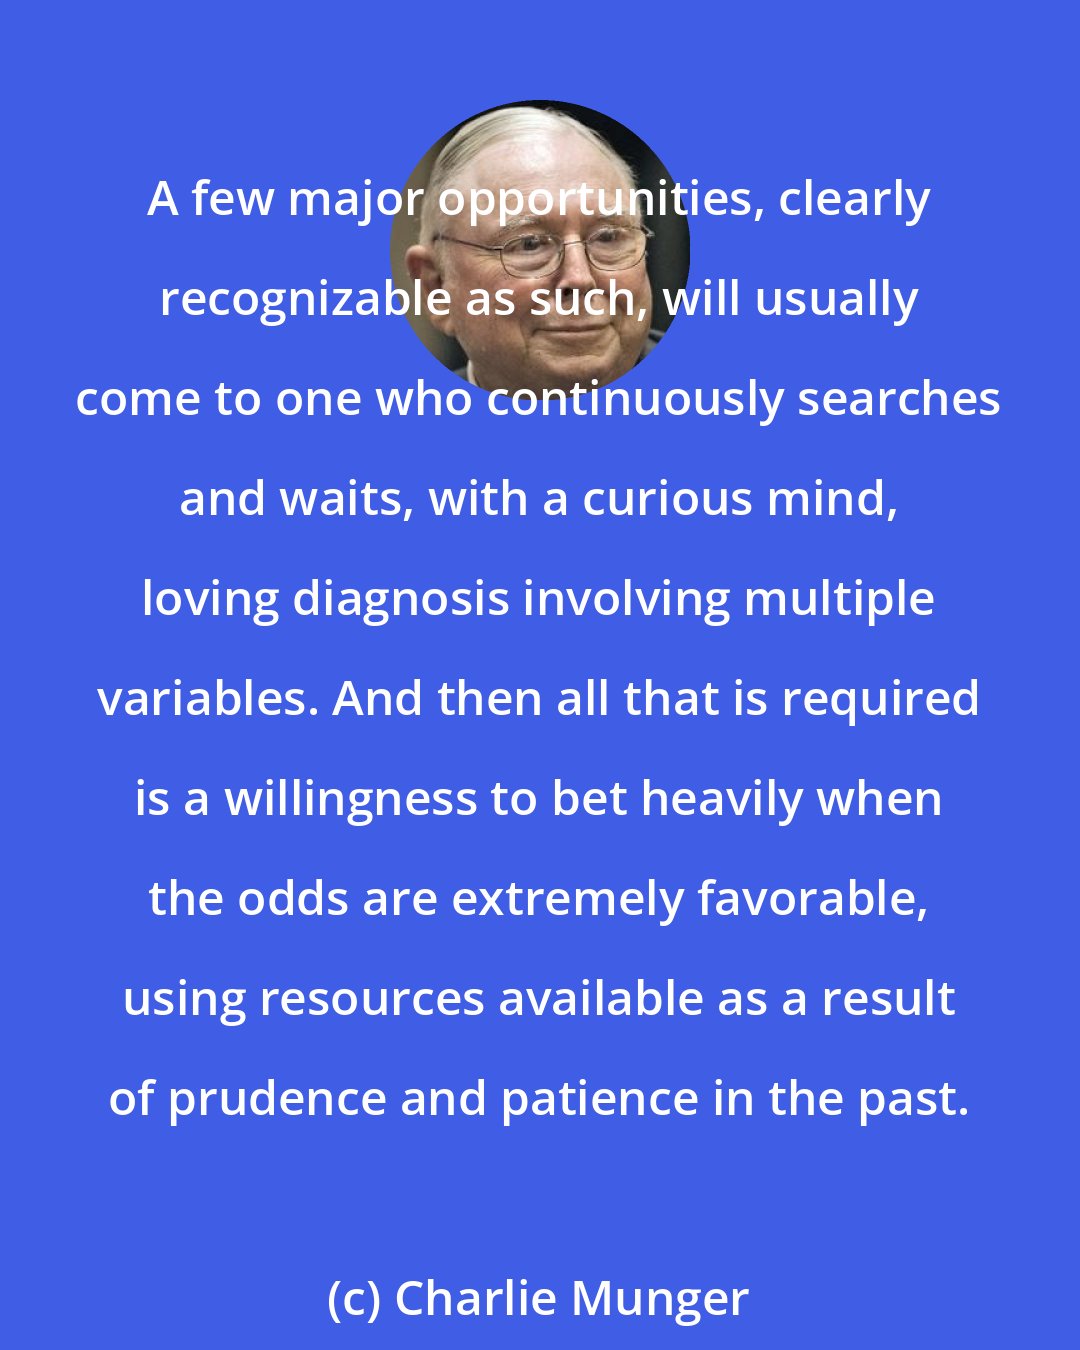 Charlie Munger: A few major opportunities, clearly recognizable as such, will usually come to one who continuously searches and waits, with a curious mind, loving diagnosis involving multiple variables. And then all that is required is a willingness to bet heavily when the odds are extremely favorable, using resources available as a result of prudence and patience in the past.